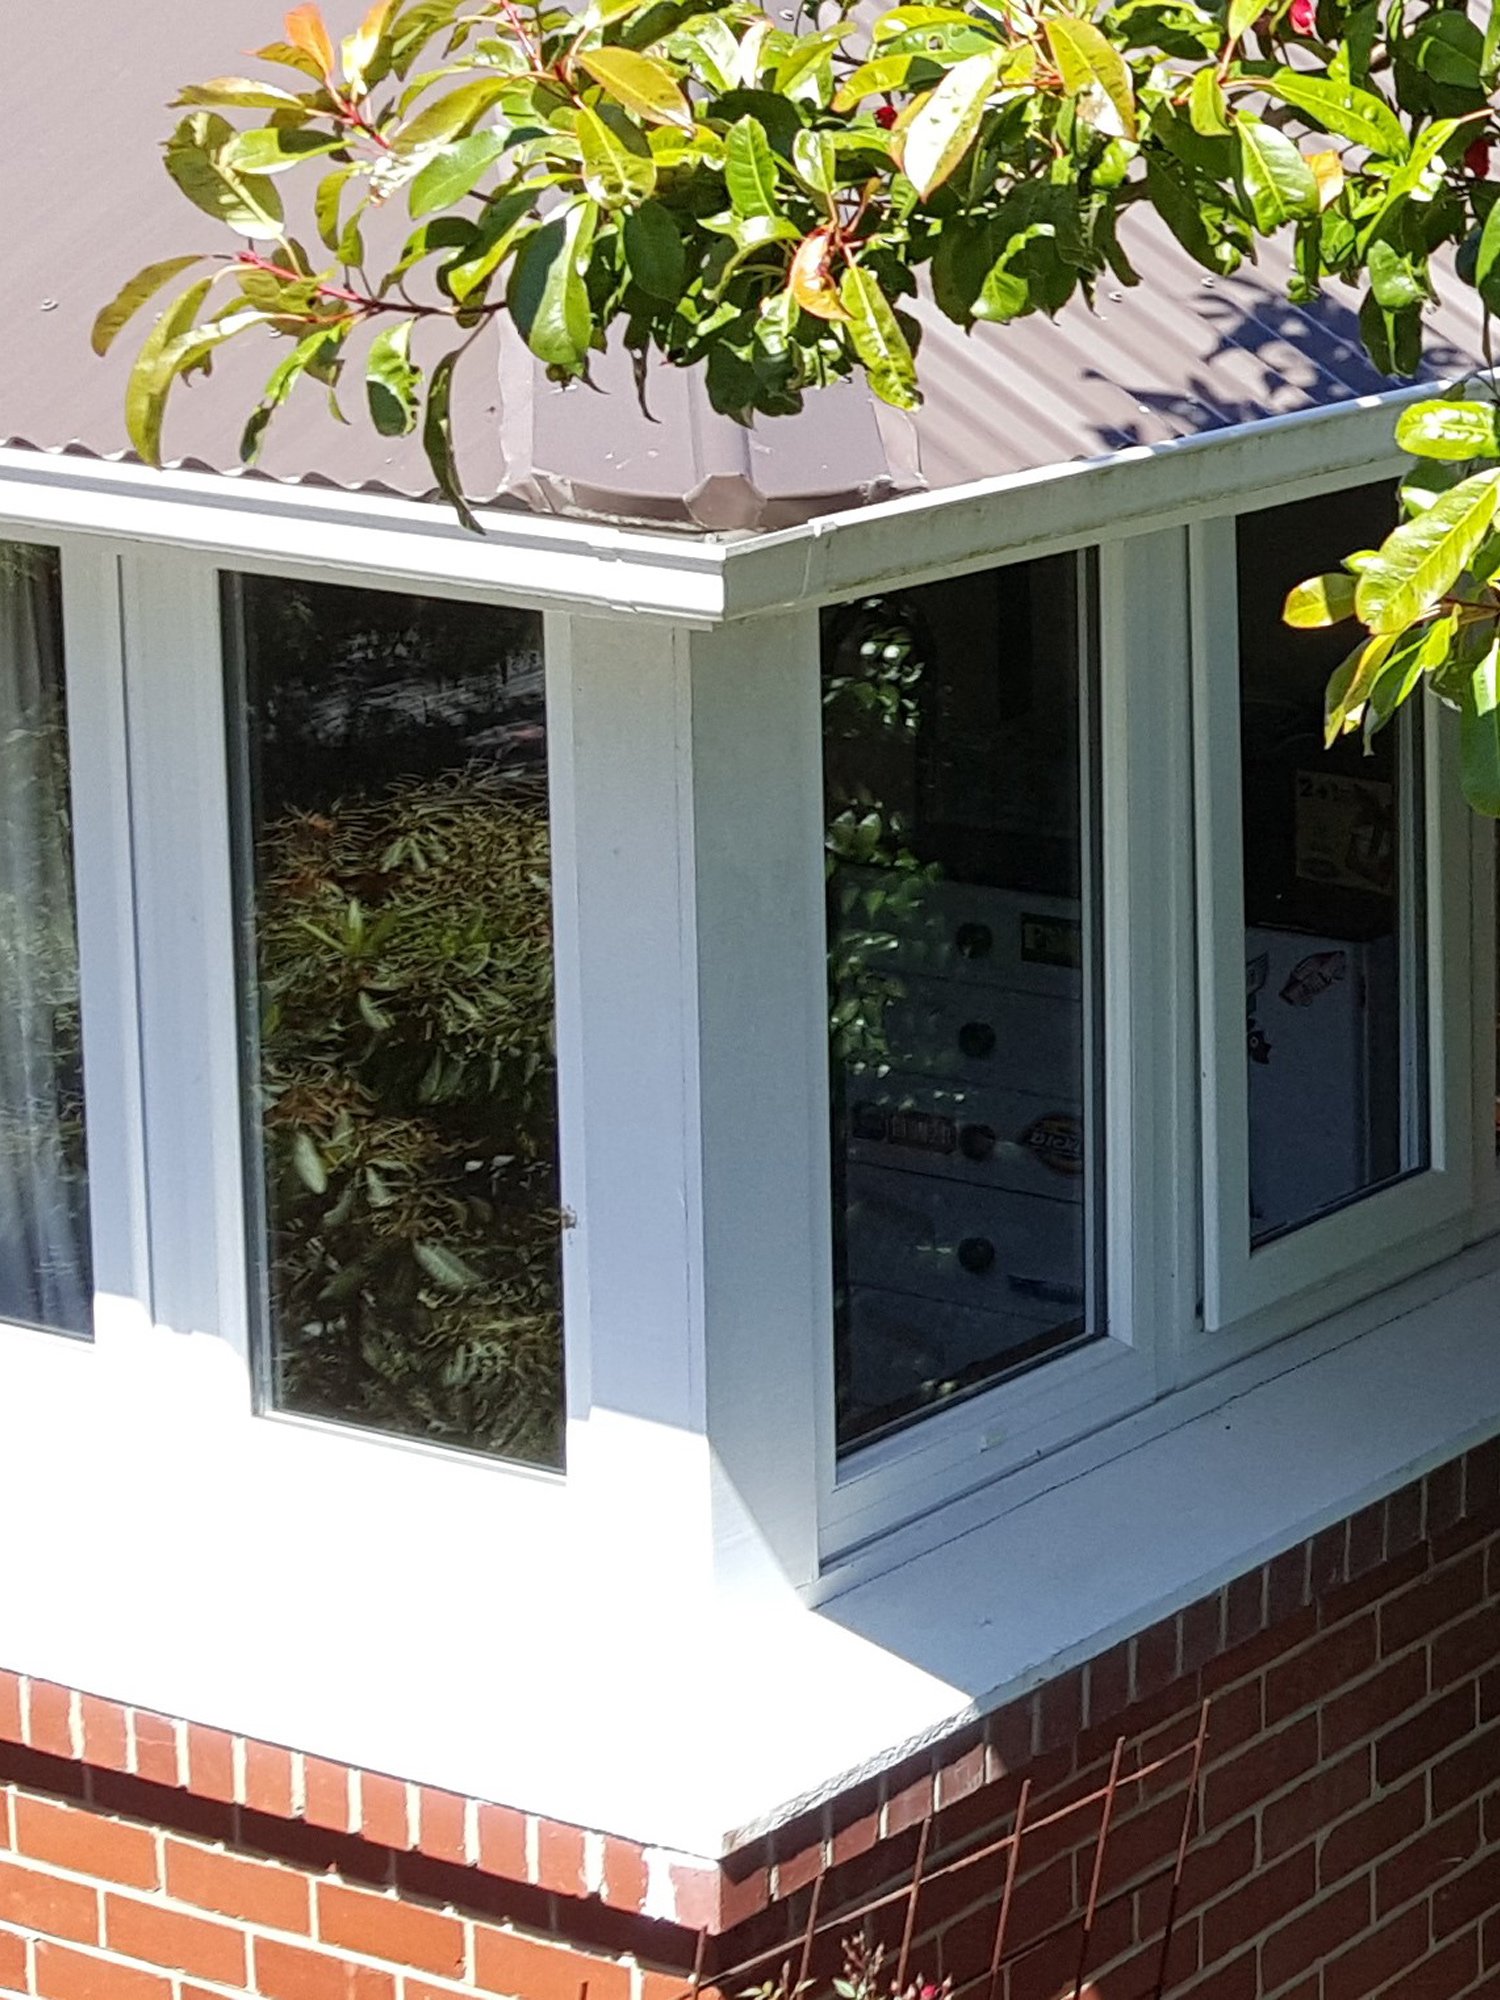 Box bay window with brown coloured upvc window framing on a yellow-white brick house